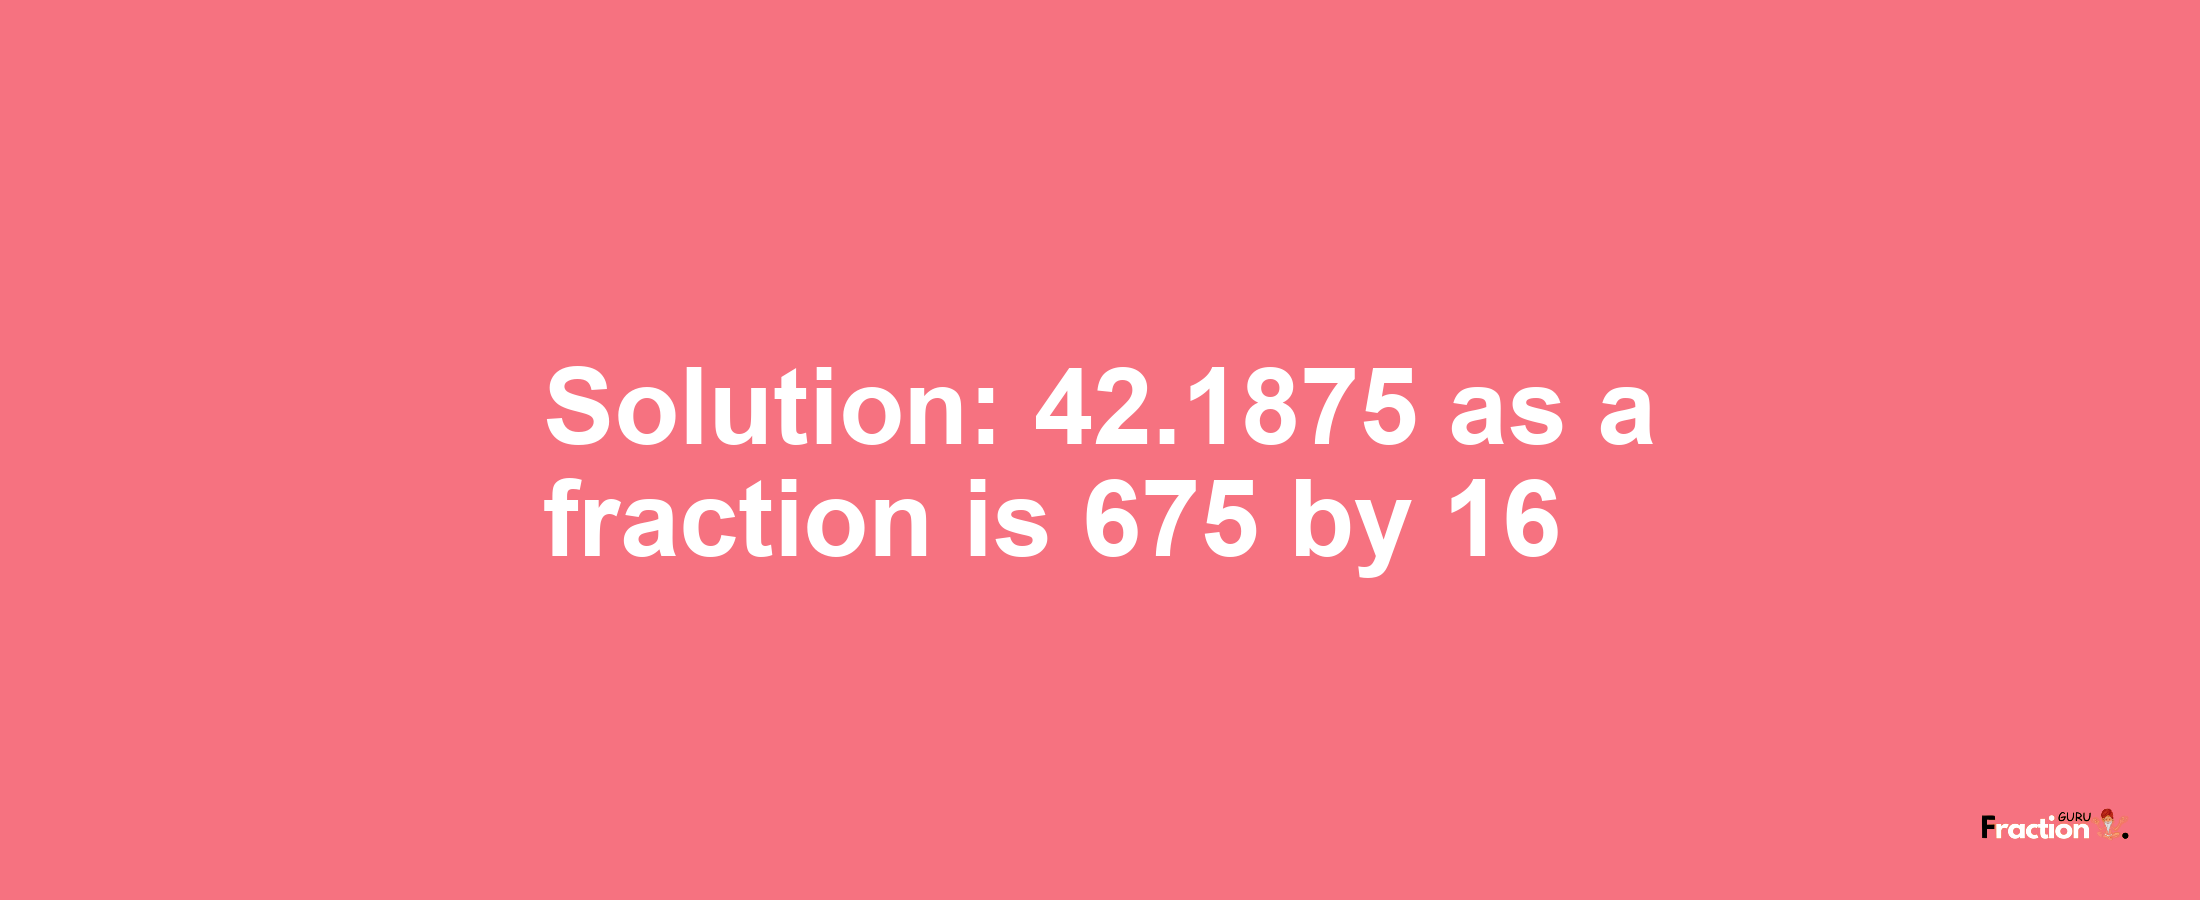 Solution:42.1875 as a fraction is 675/16